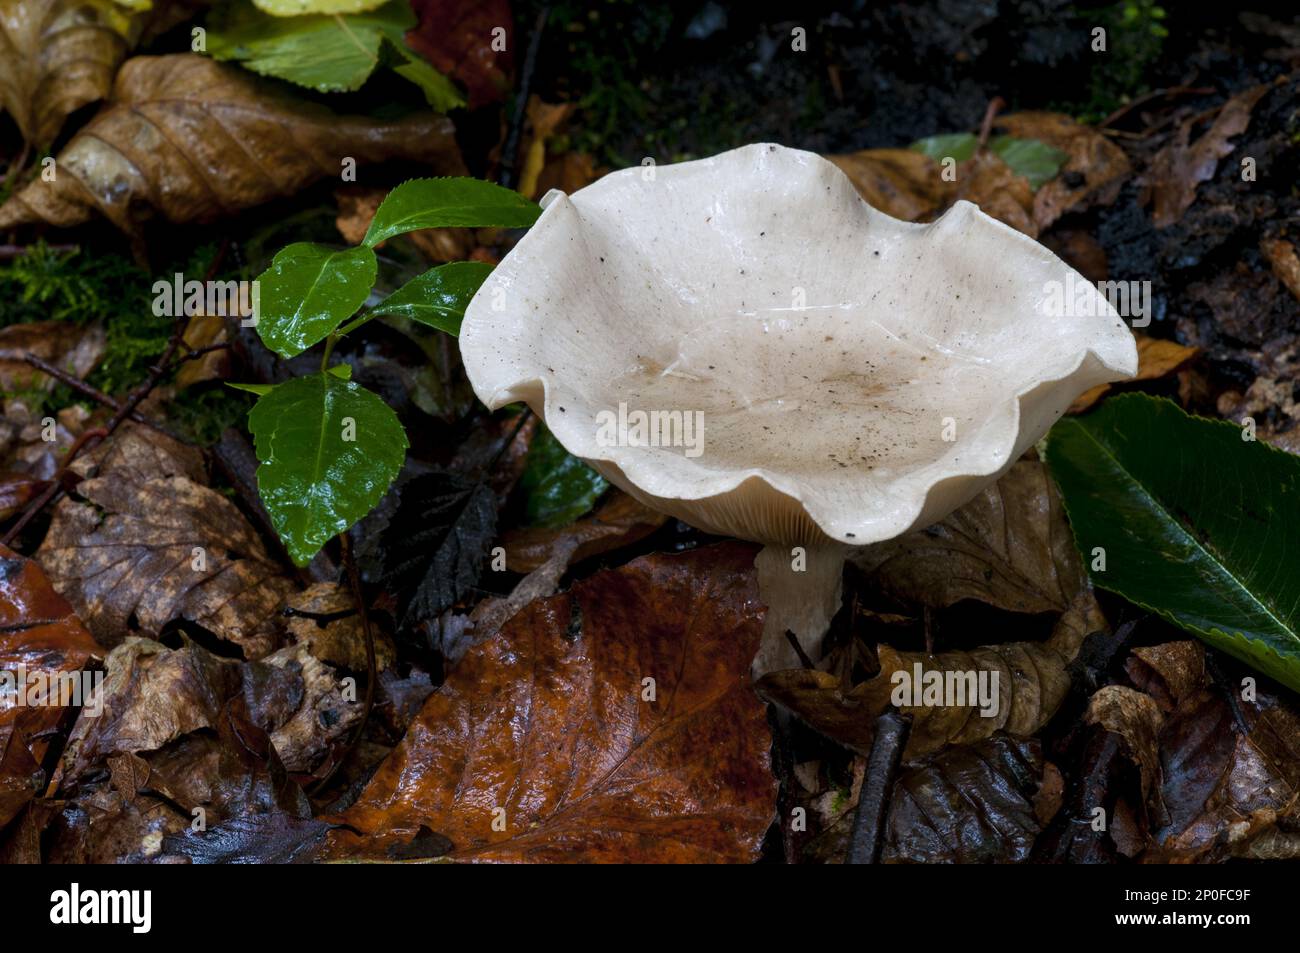 Clouded funnel fungus (Clytocybe nebularis) collecting rainwater in Clumber Park, Nottinghamshire Stock Photo